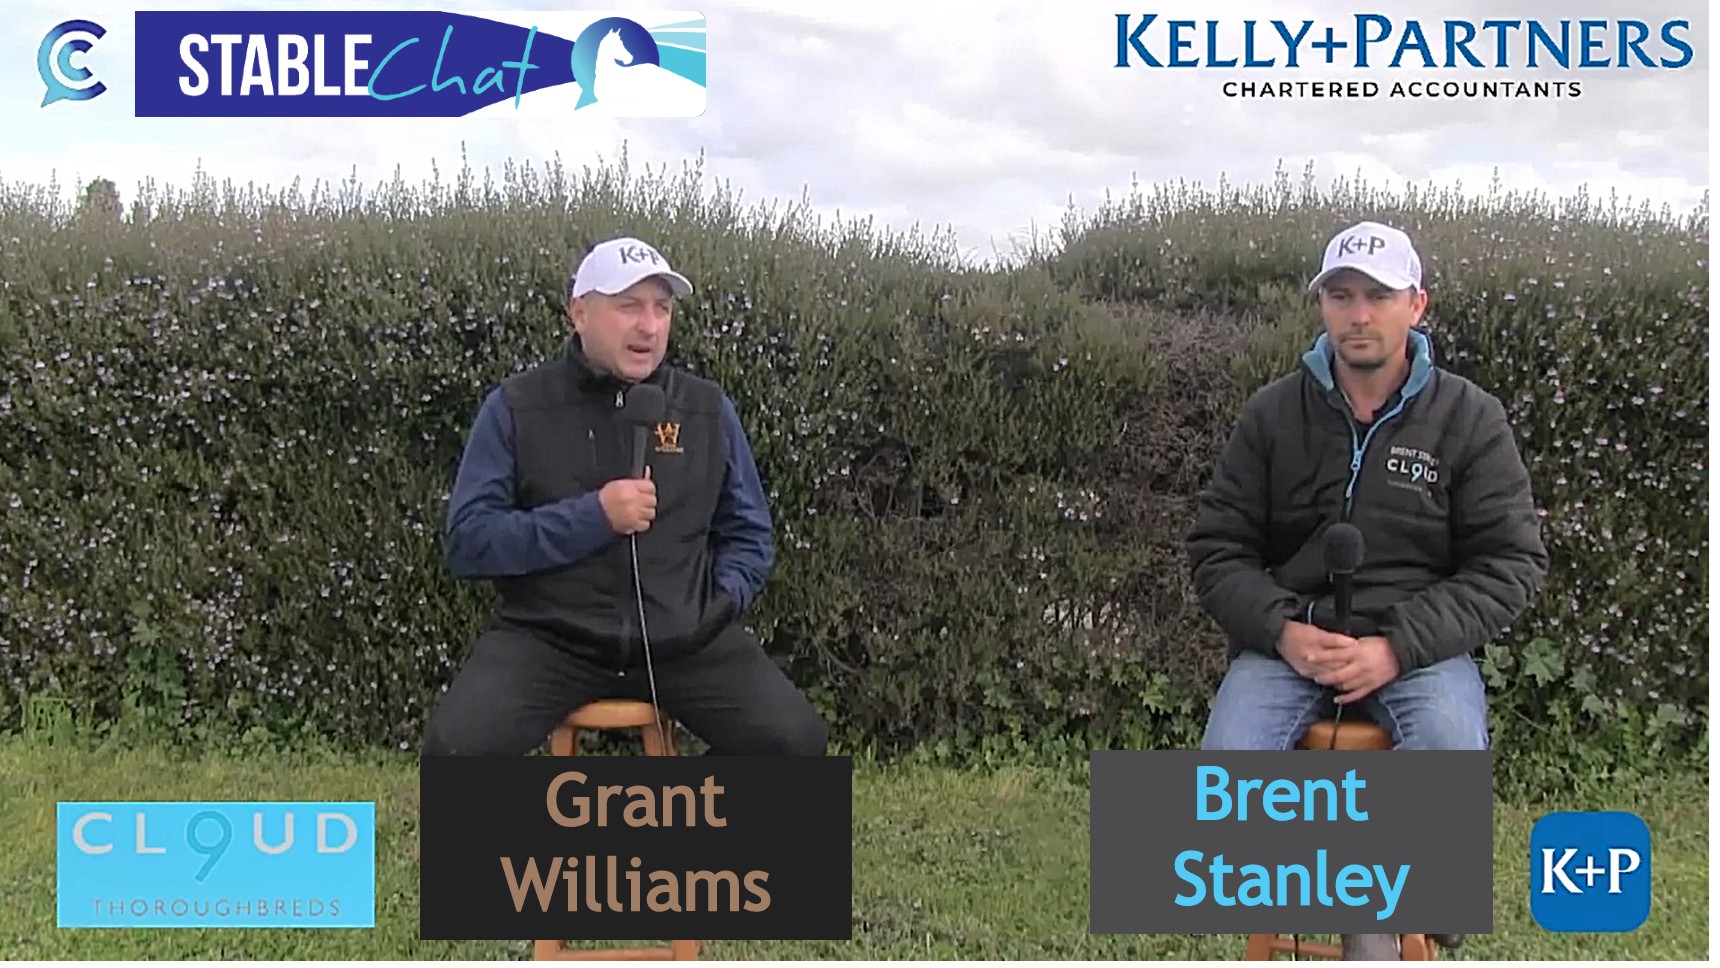 You are currently viewing 50: Stable Chat with Brent Stanley and Grant Williams